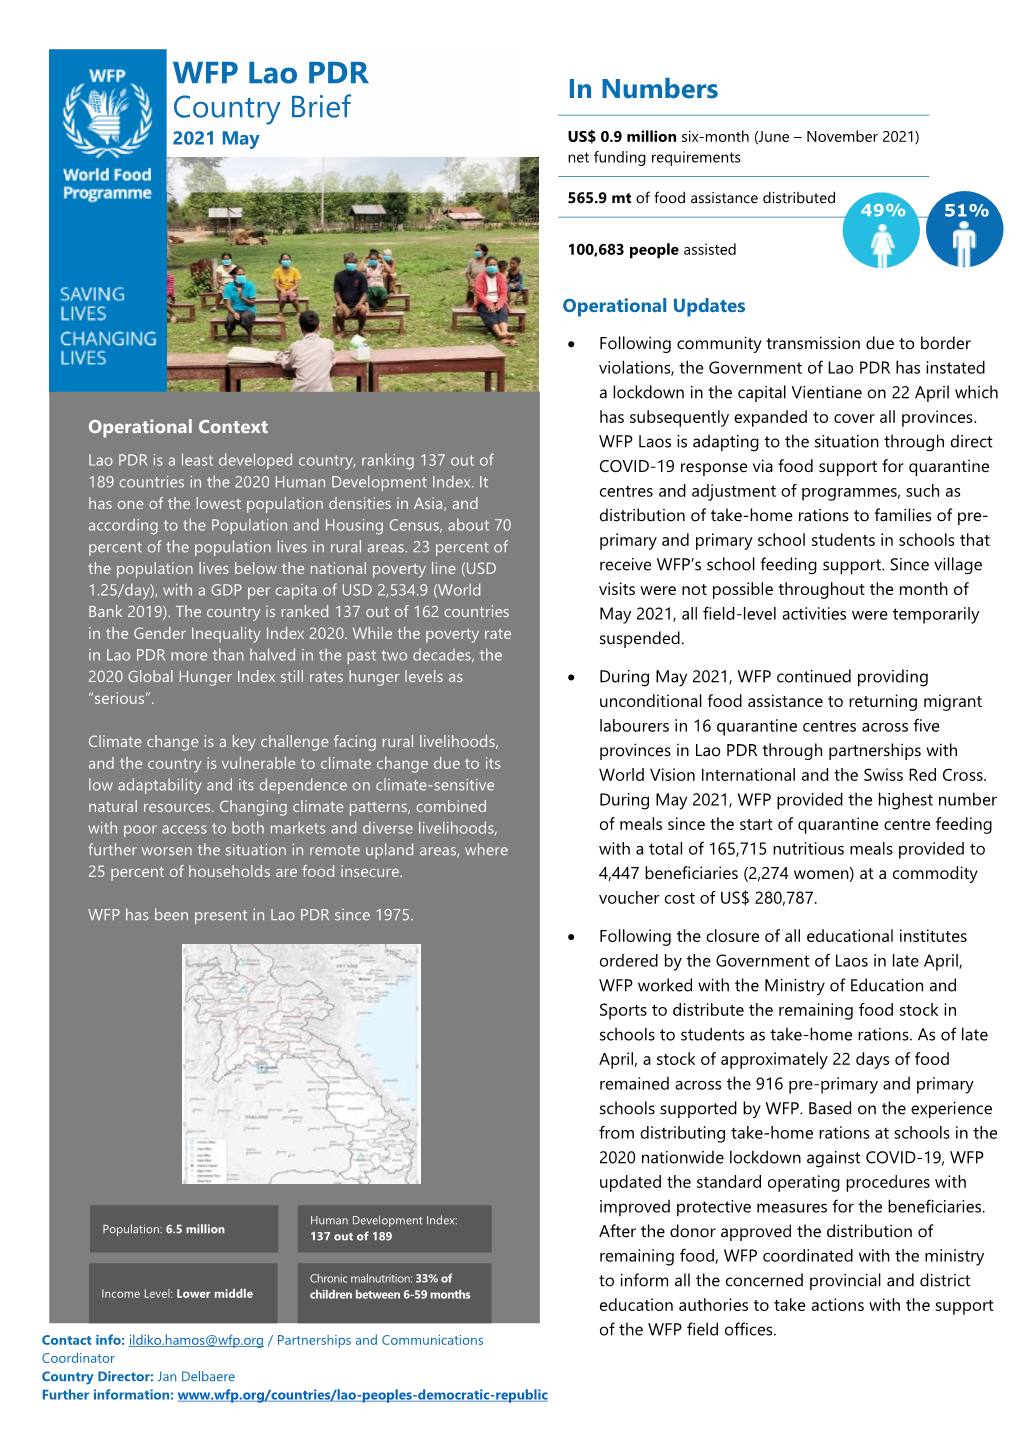 WFP Lao PDR Country Brief